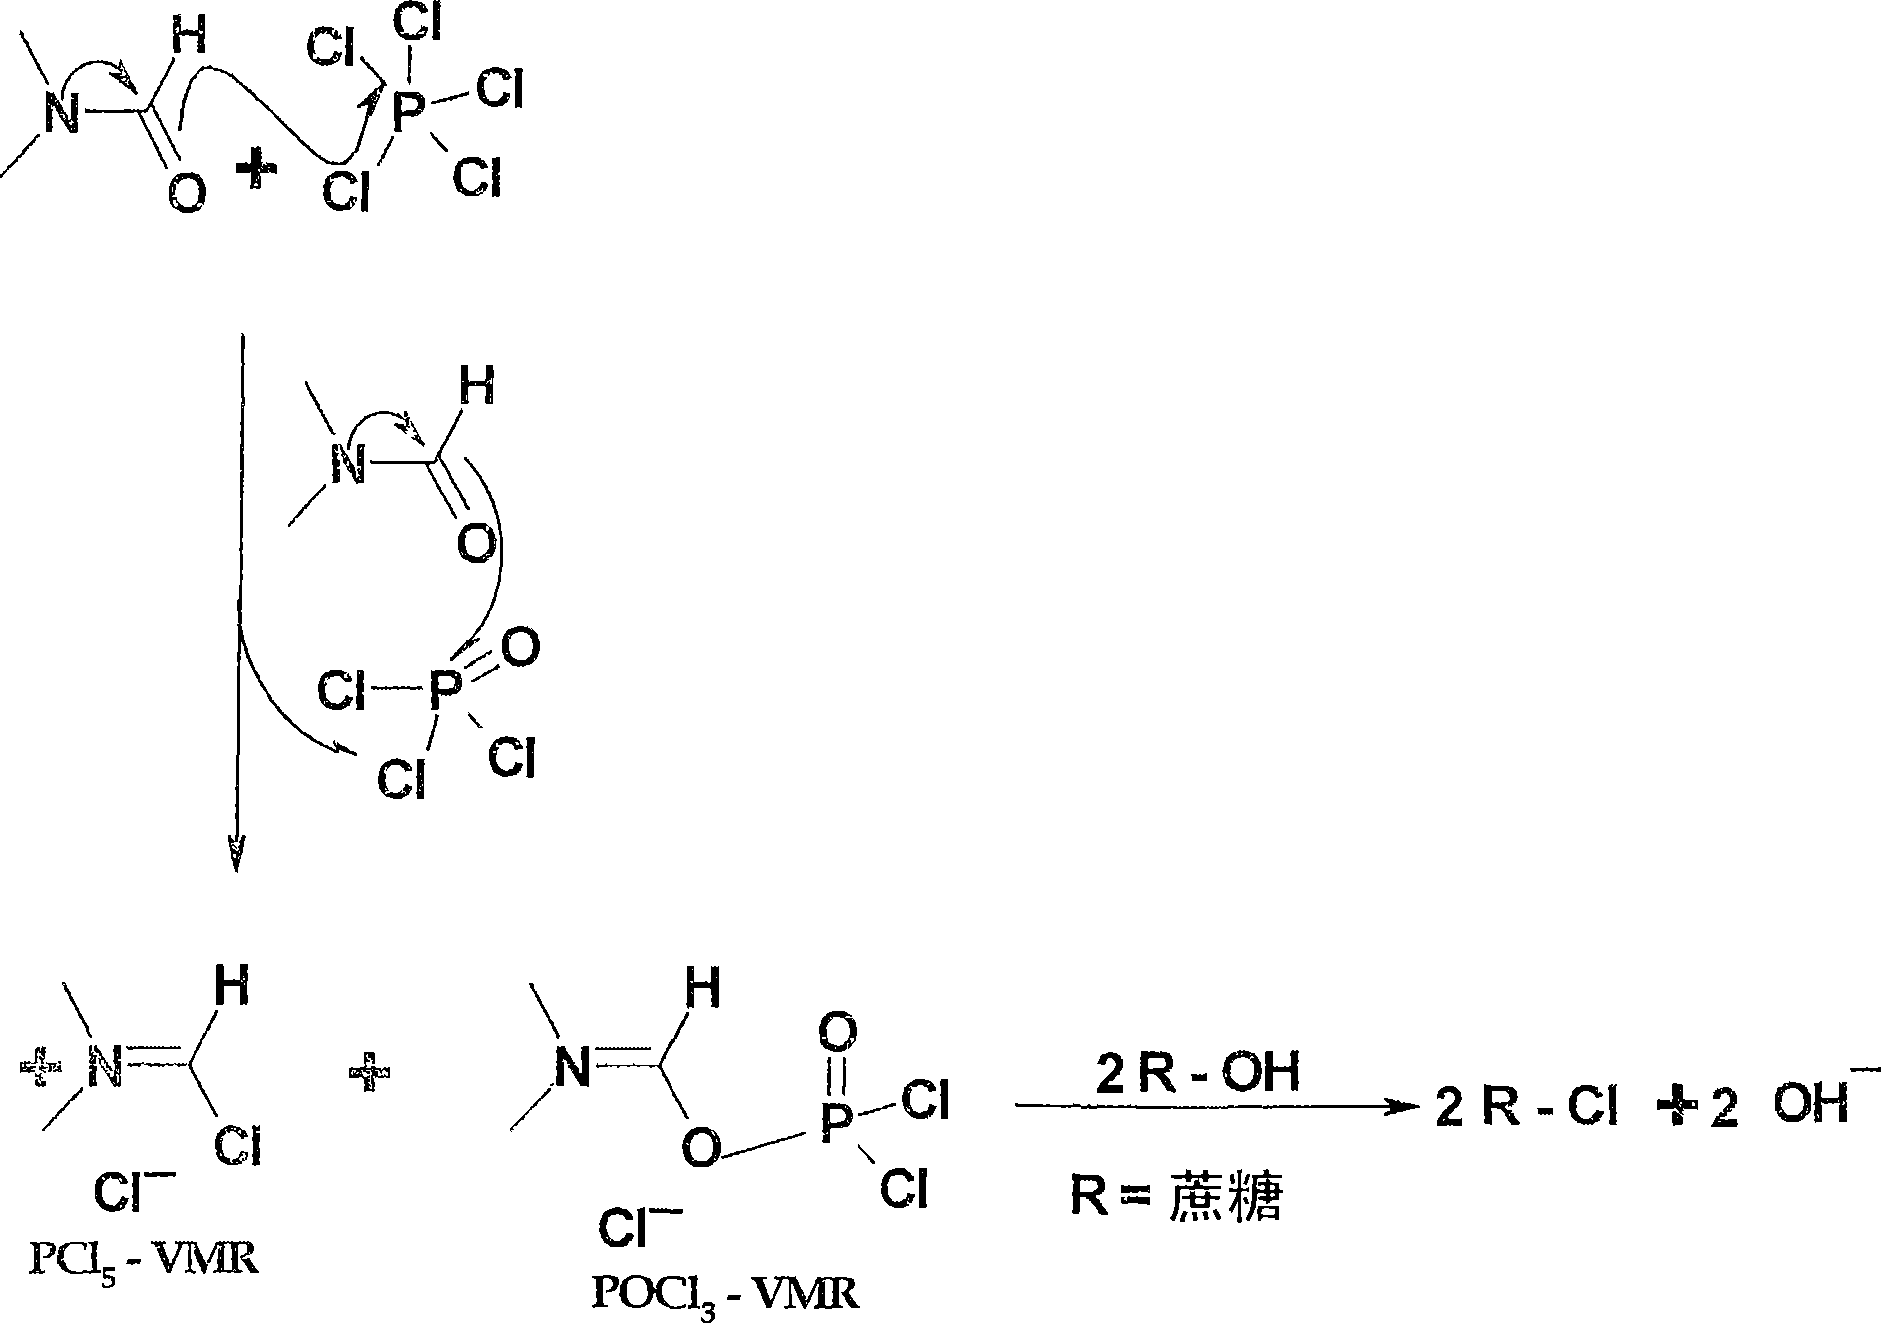 Generation of phosphorus oxychloride as by-product from phosphorus pentachloride and dmf and its use for chlorination reaction by converting into vilsmeier-haack reagent.